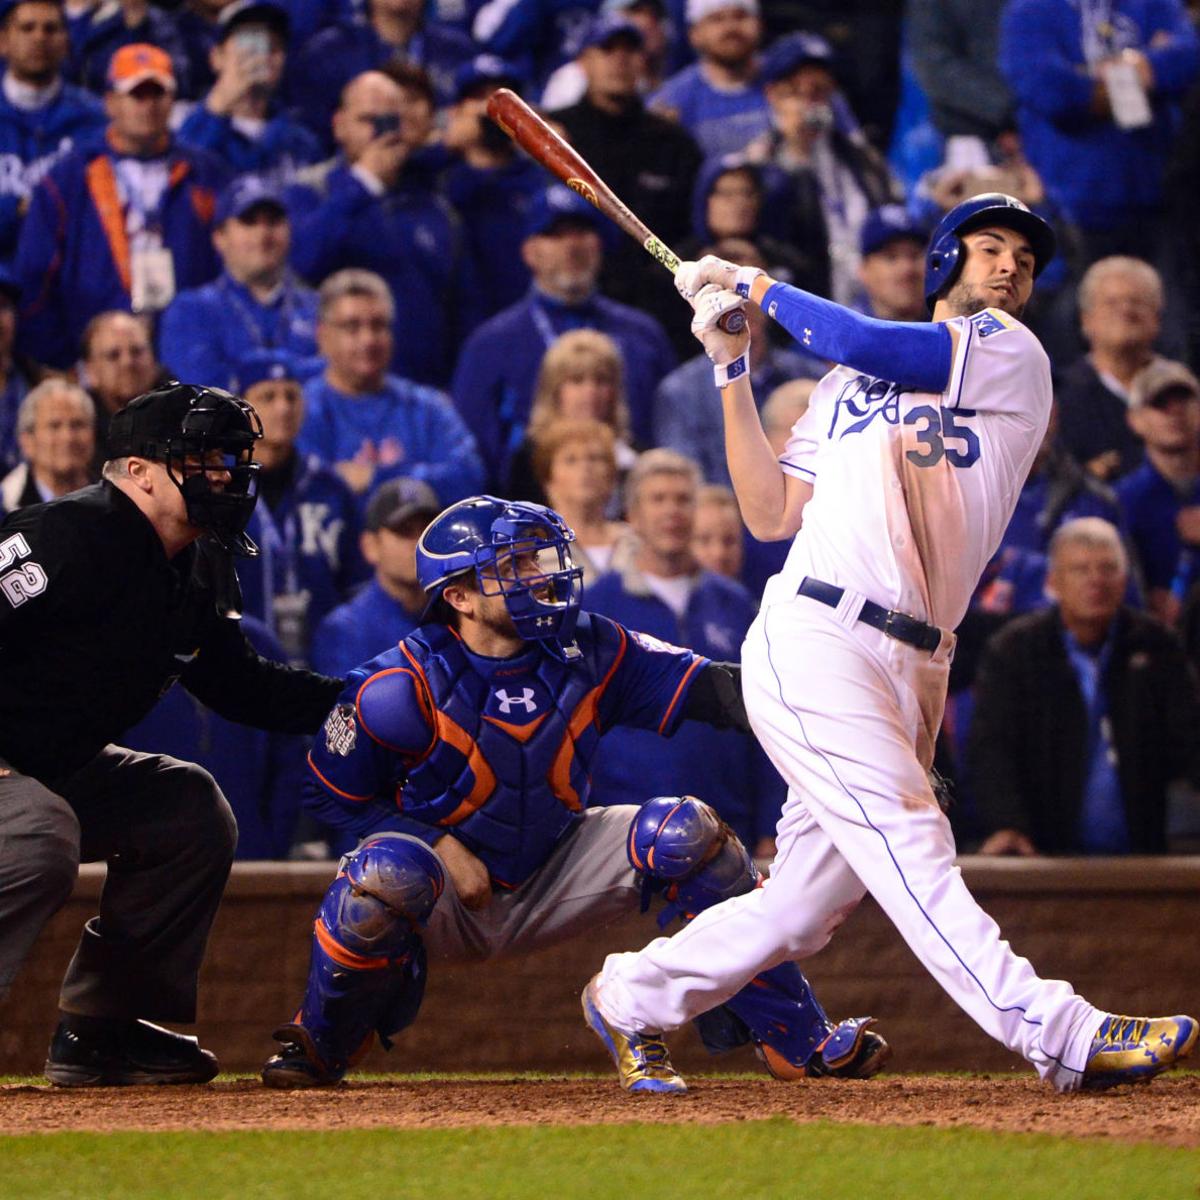 Kansas City Royals beat the NY Mets 7-2 in game 5 of the World